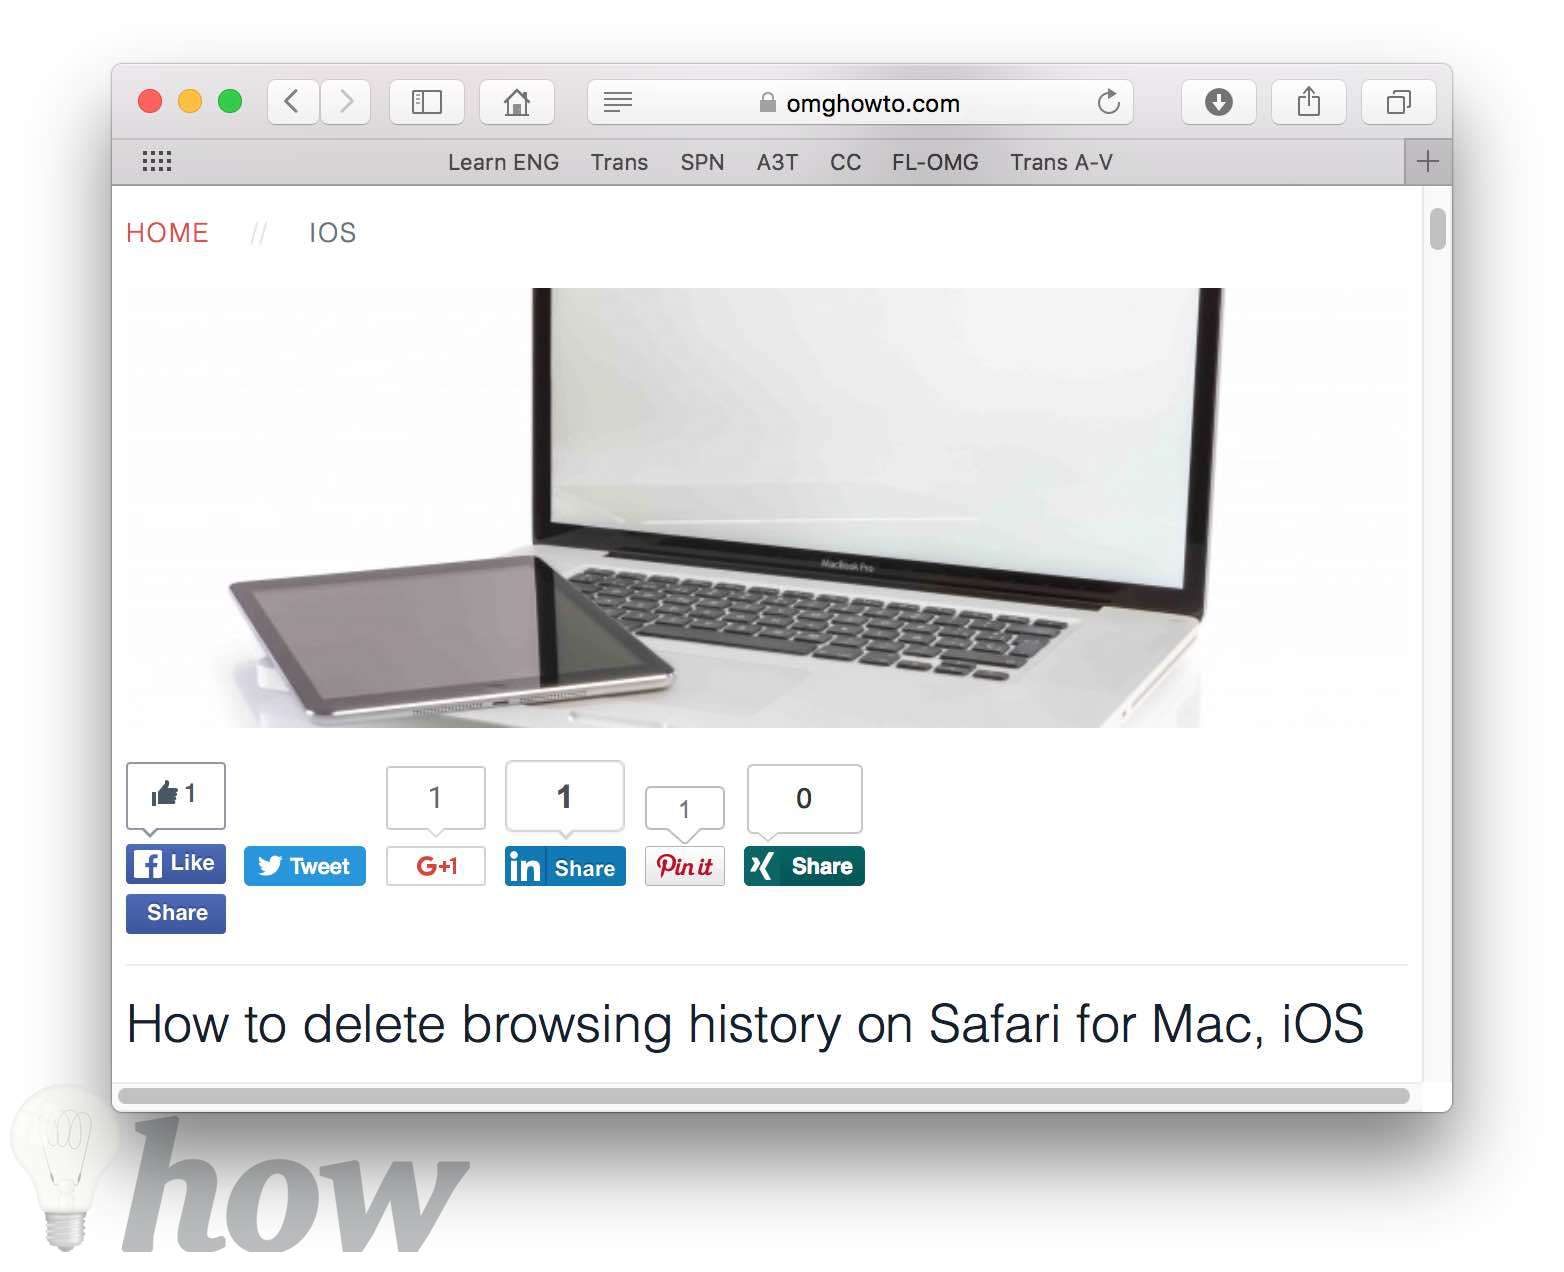 what is the best browser for mac os x 10.6.8